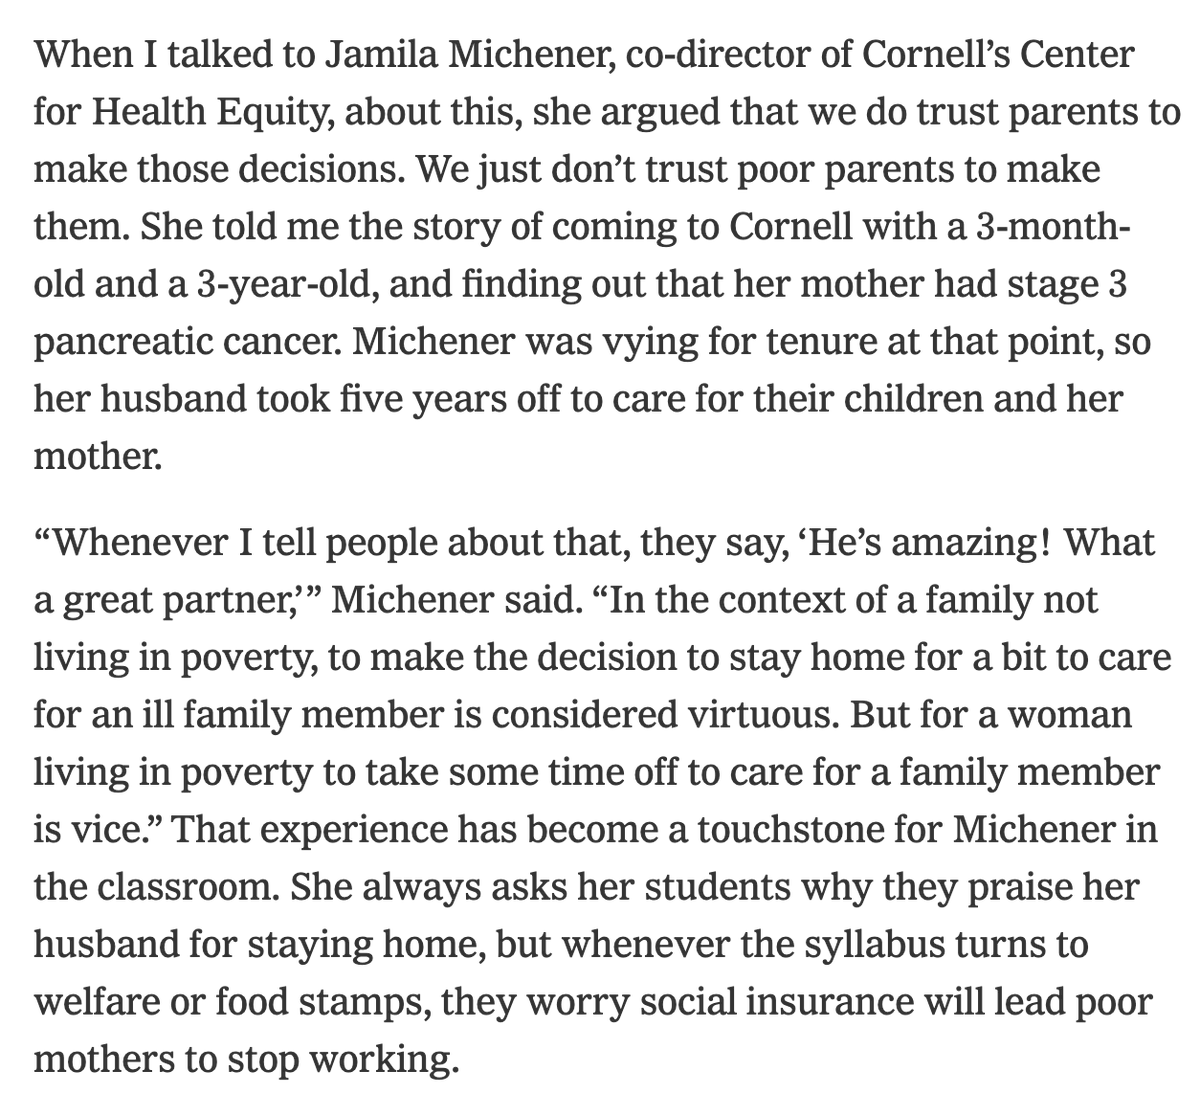 In other contexts, and particularly other social strata, we understand and honor this. It's only with the poor that we don't. I love this point and story by  @povertyscholar: